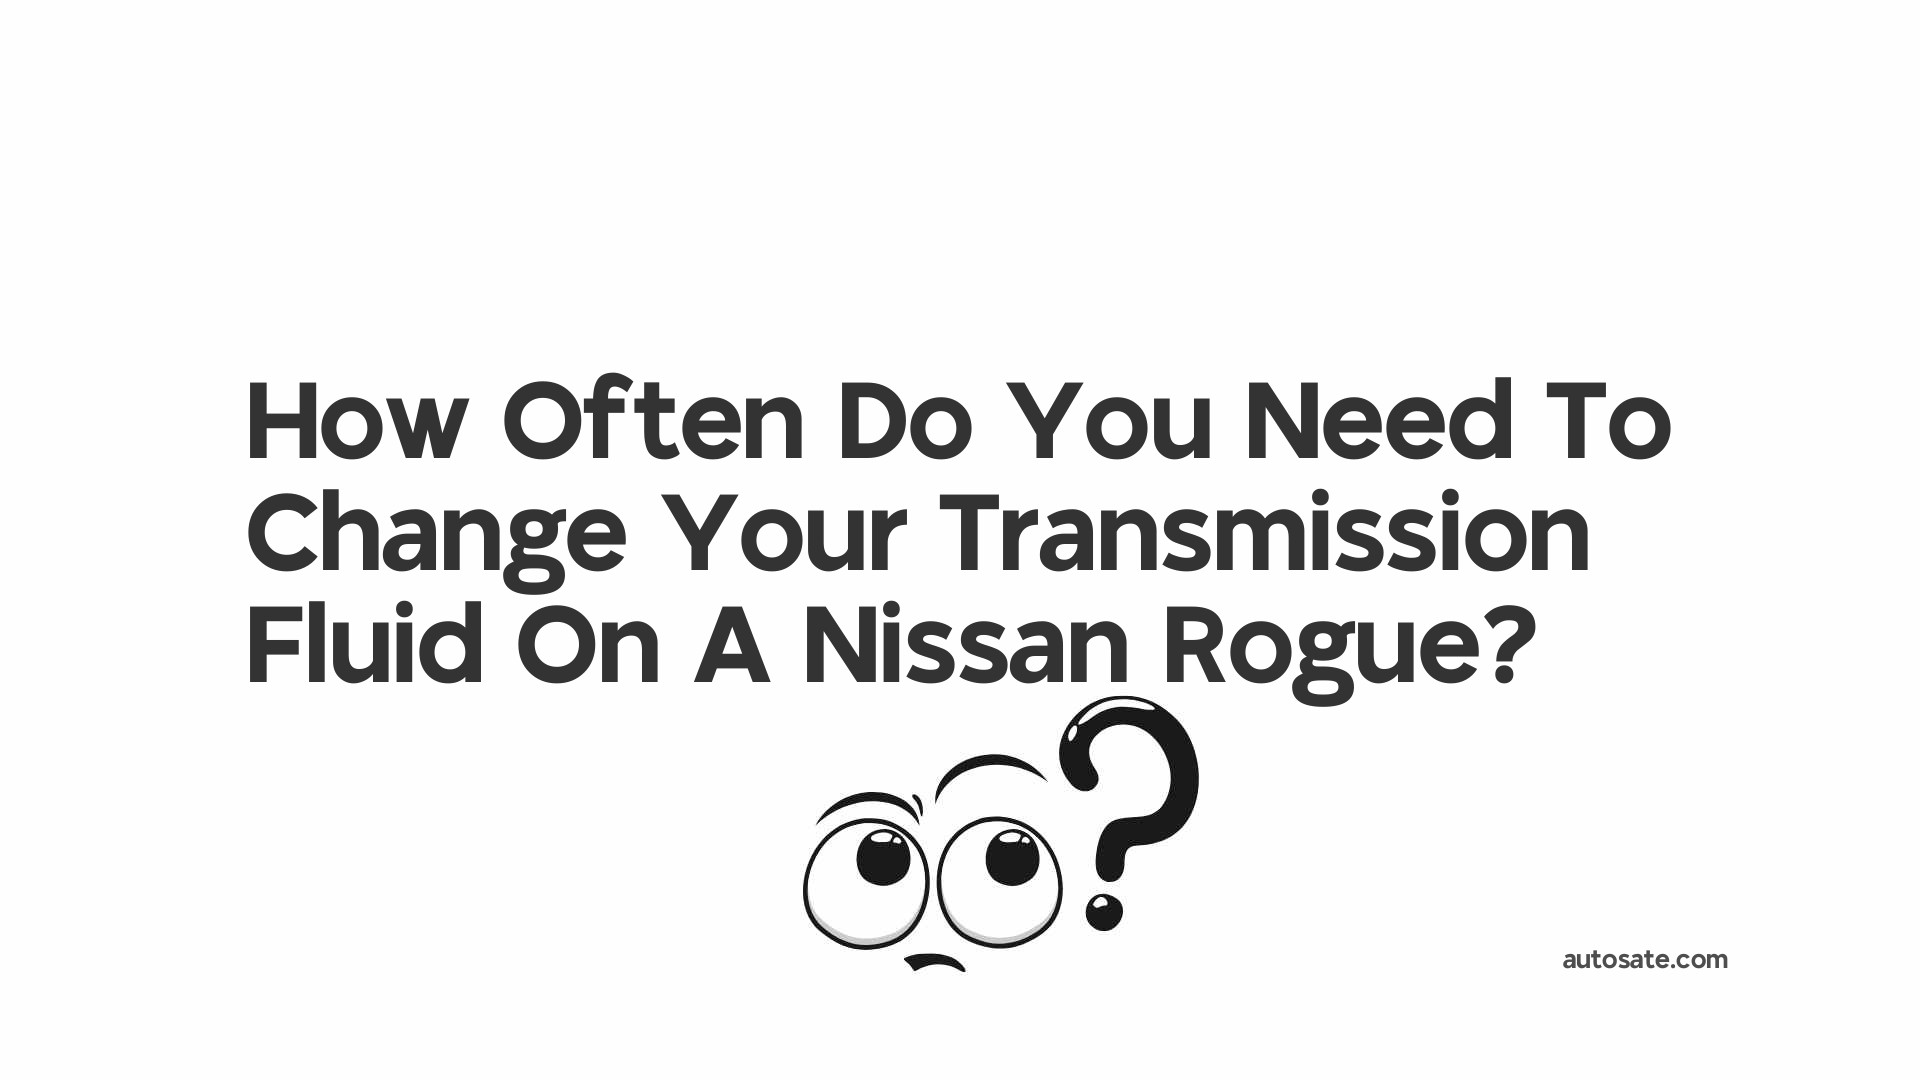 How Often Do You Need To Change Your Transmission Fluid On A Nissan Rogue?